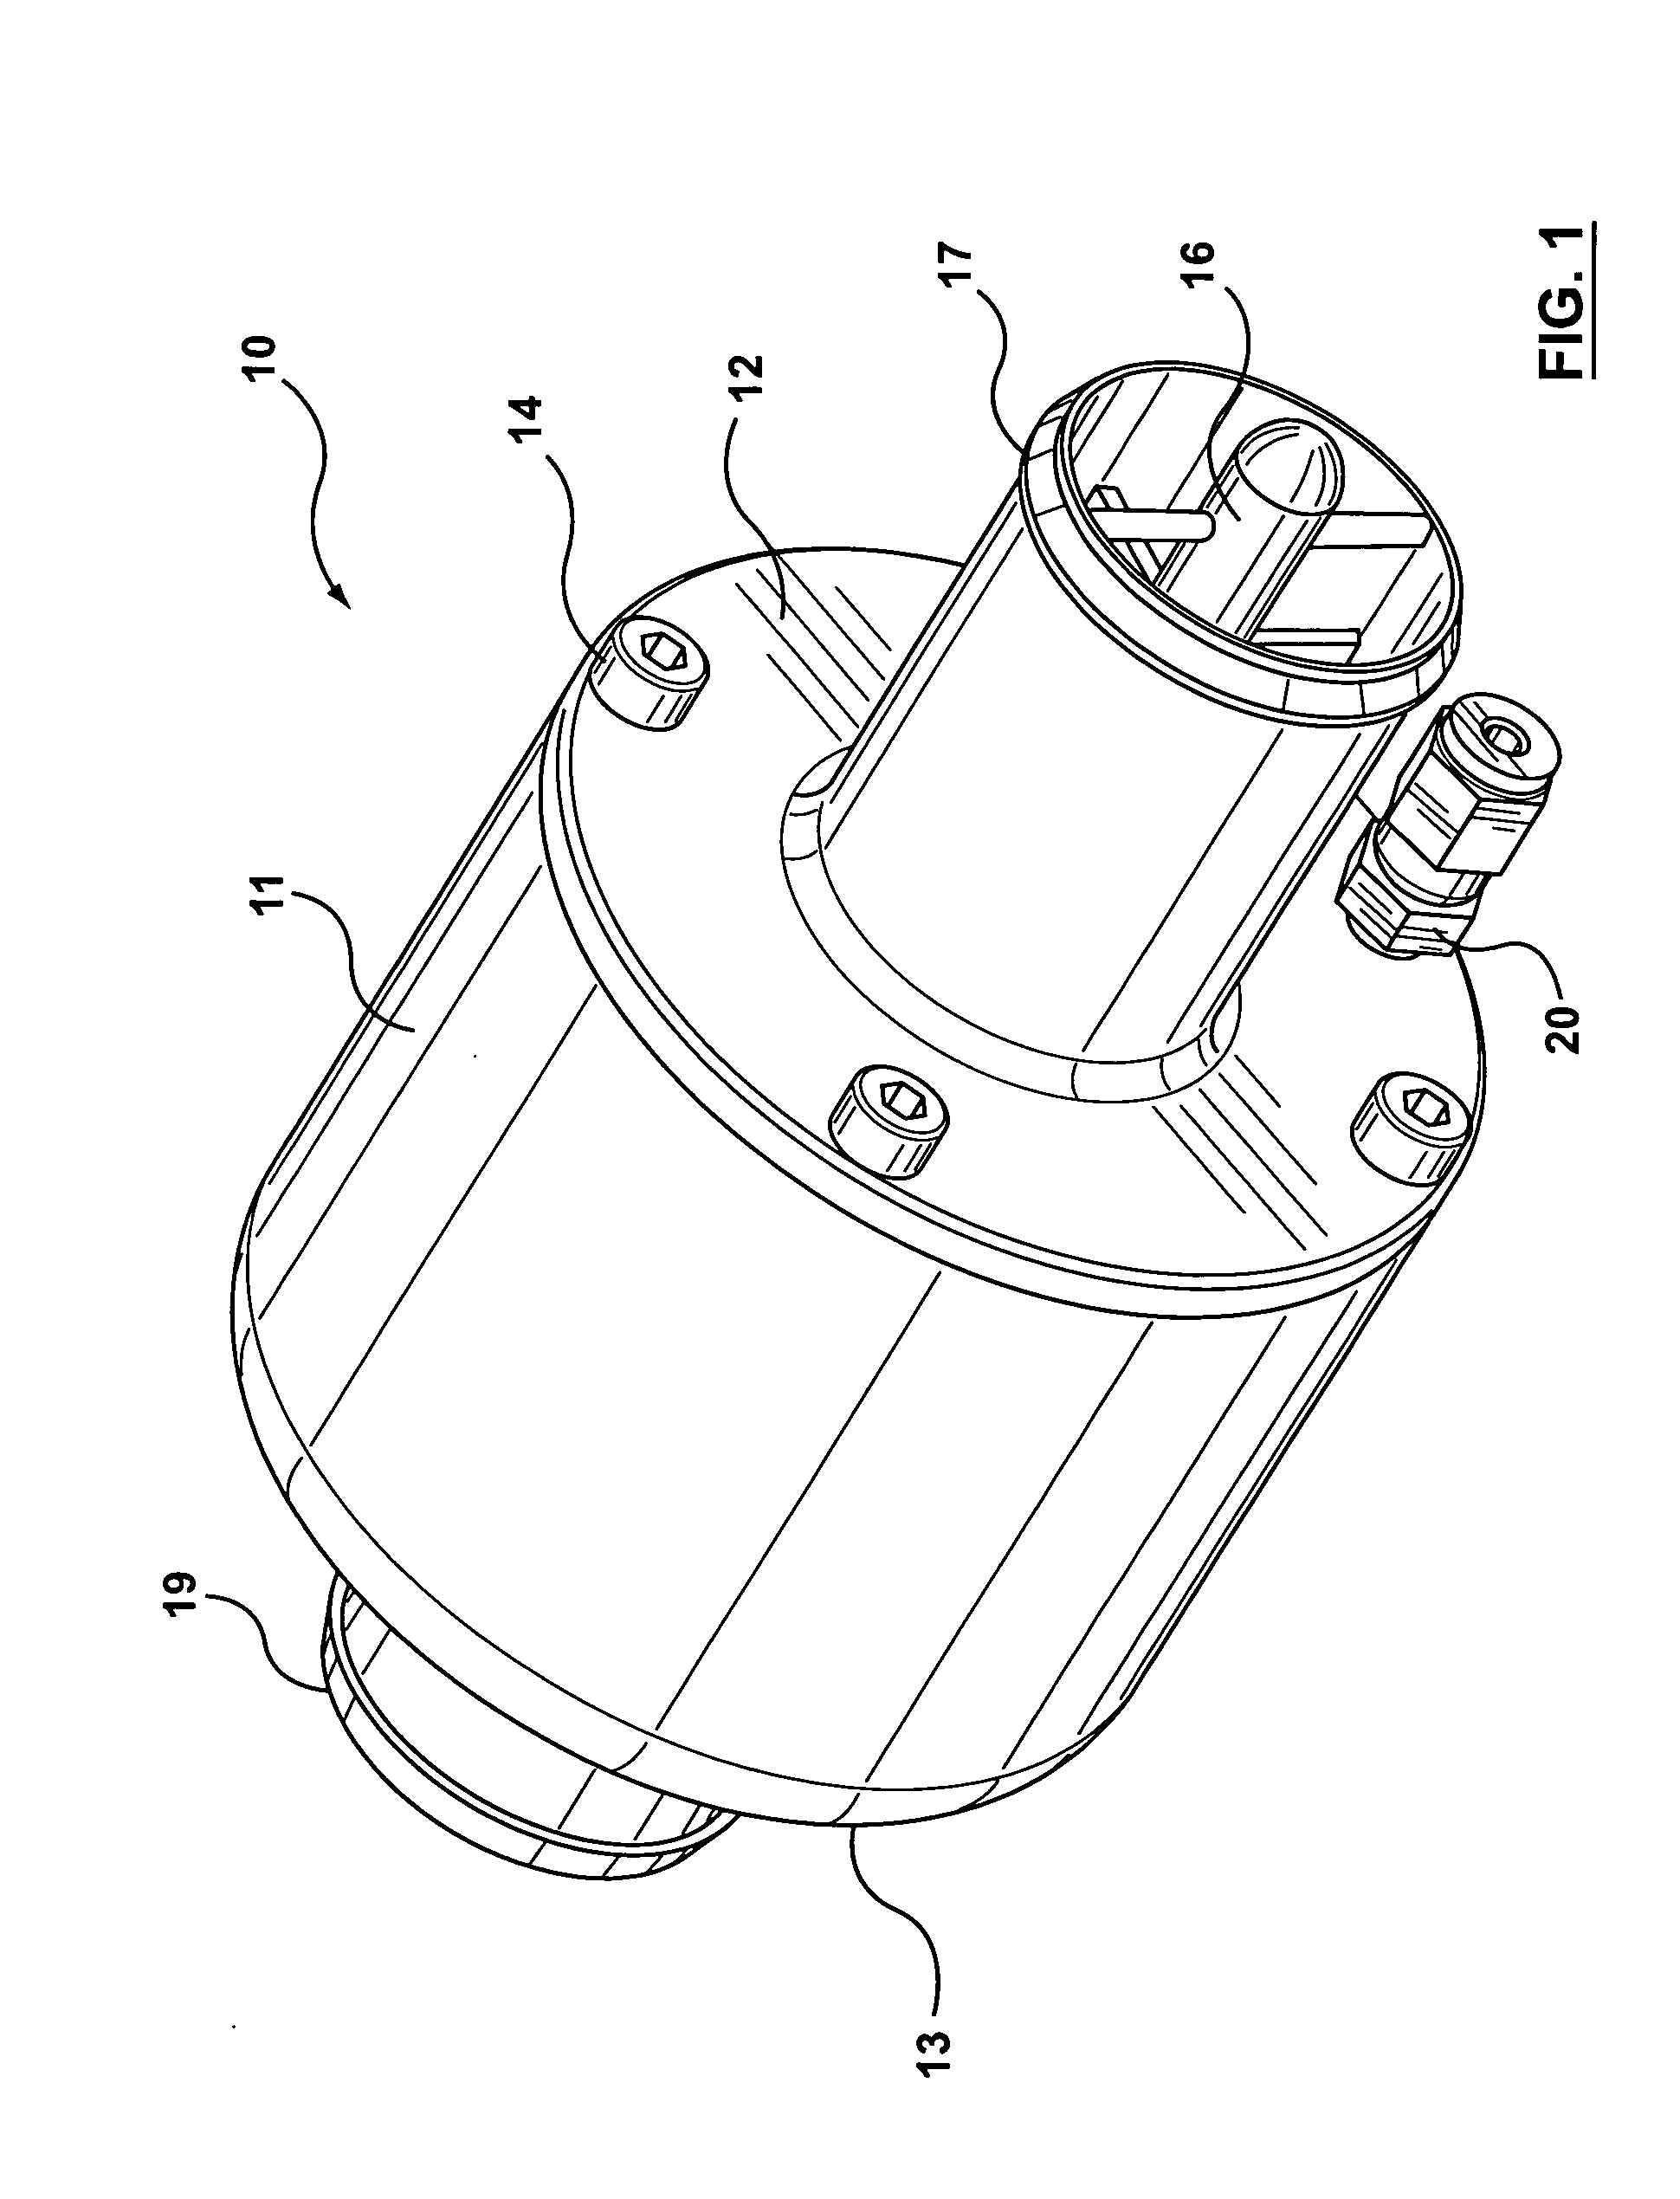 Apparatus for separating liquid from a process gas stream of an electrochemical cell stack